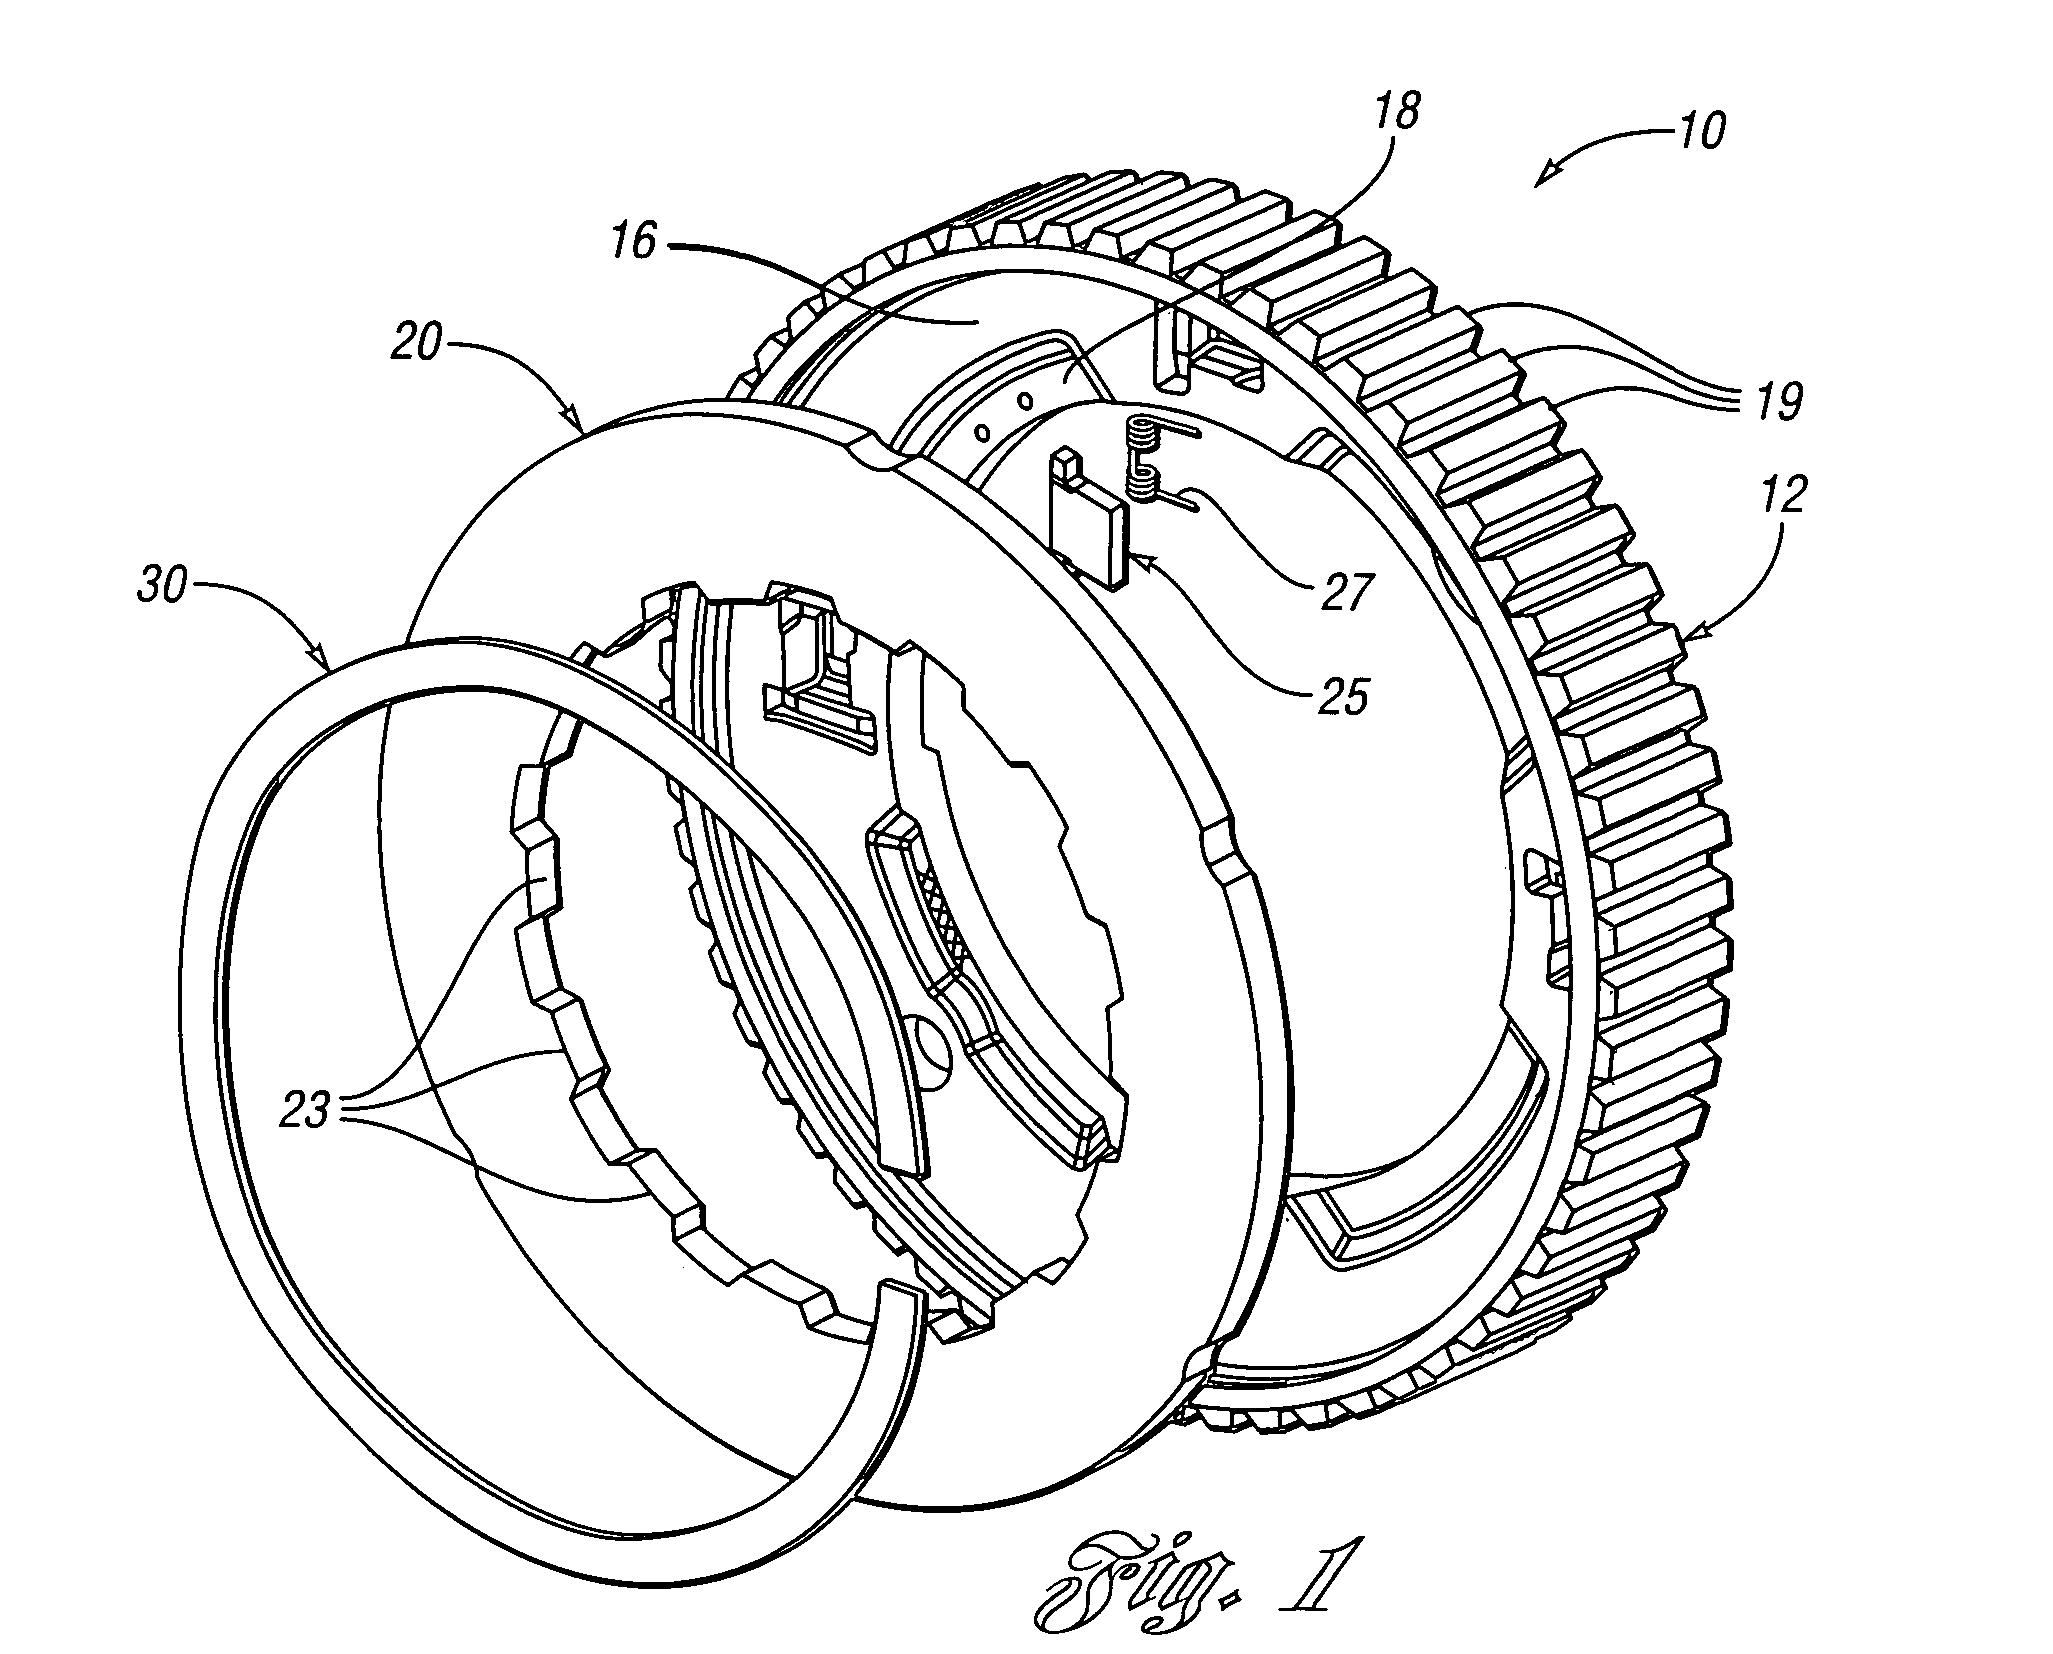 Overrunning coupling assembly having improved shift feel and/or noise reduction